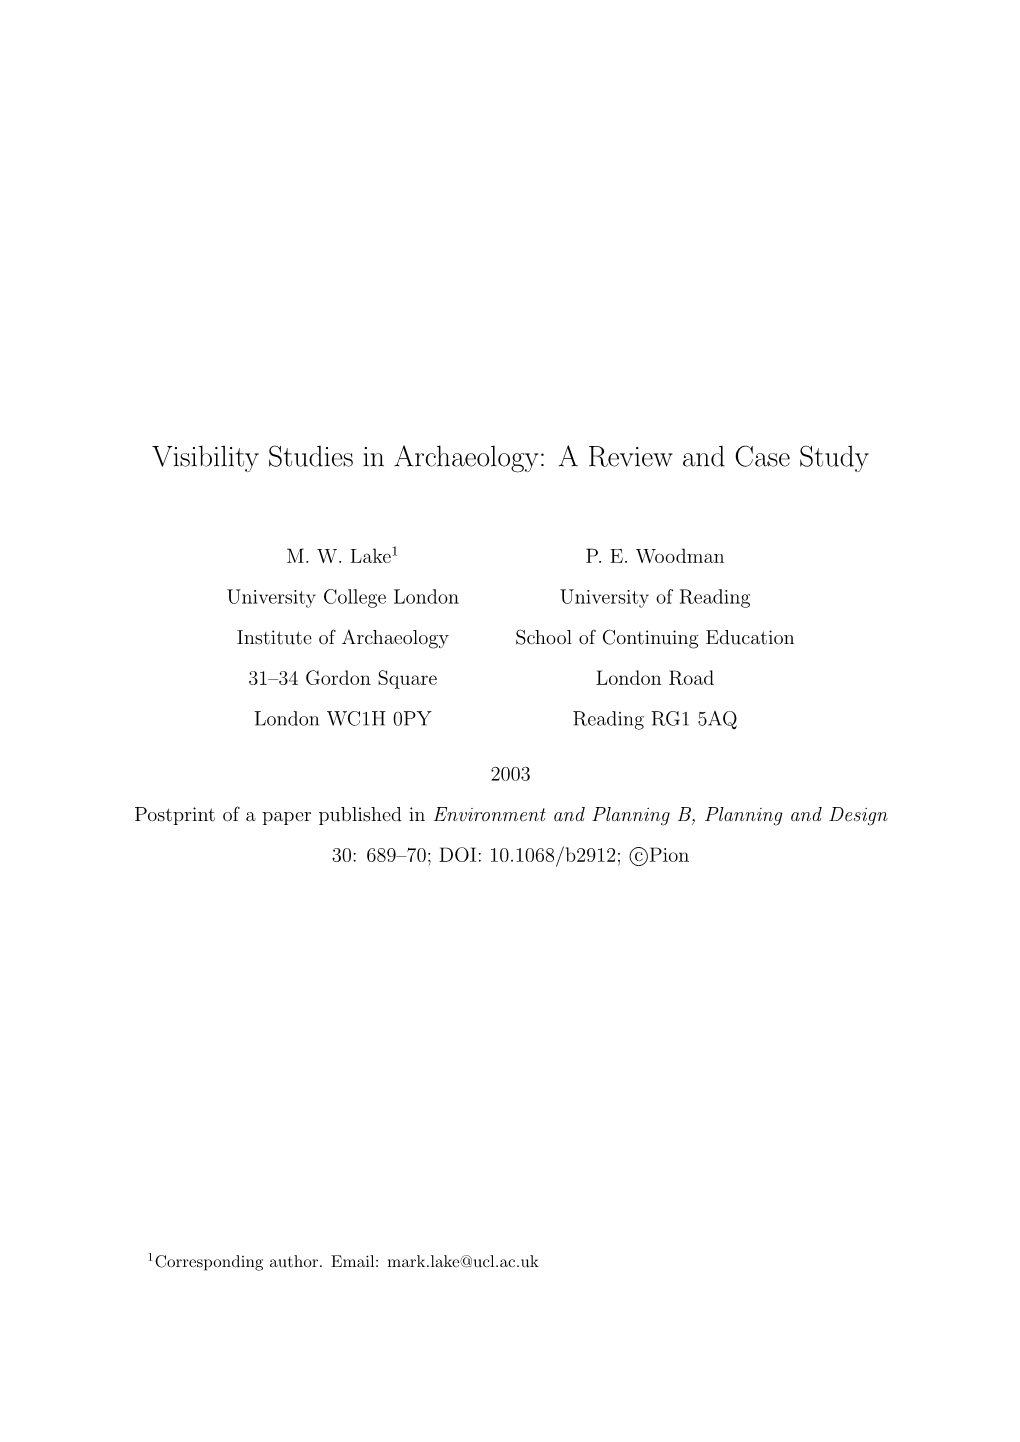 Visibility Studies in Archaeology: a Review and Case Study